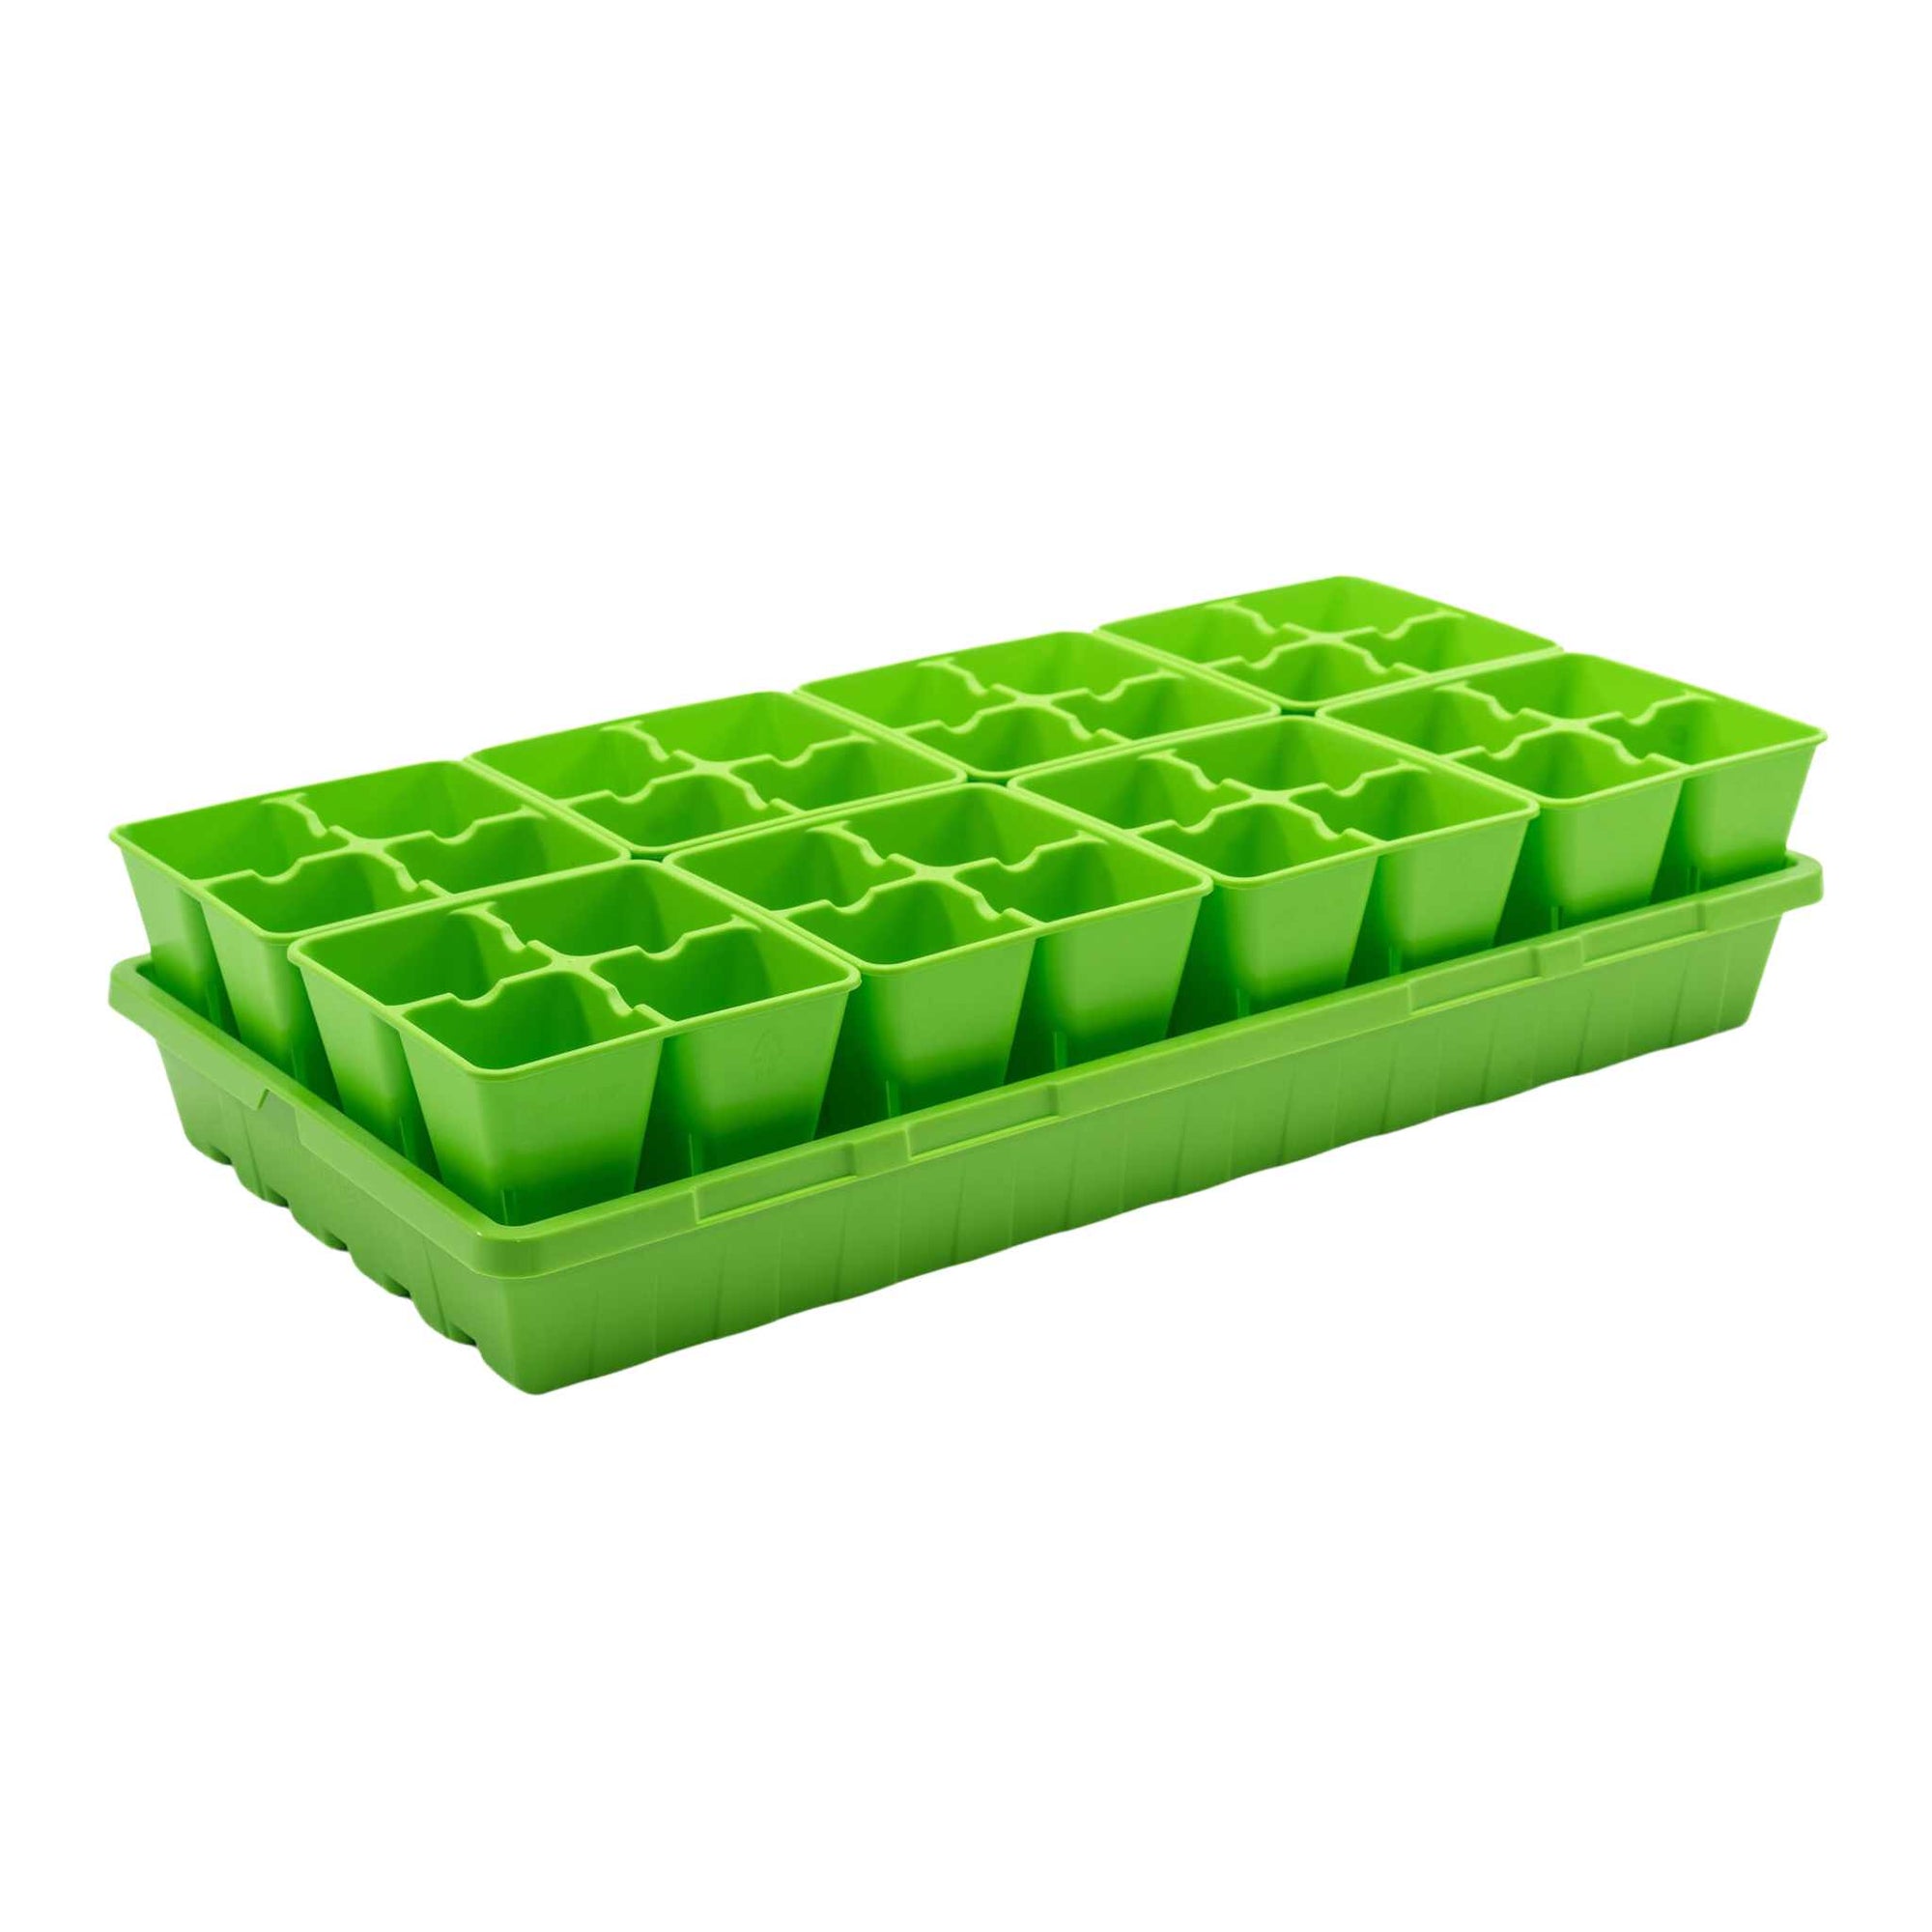 Green 4 Cell plug trays in a 1020 green tray